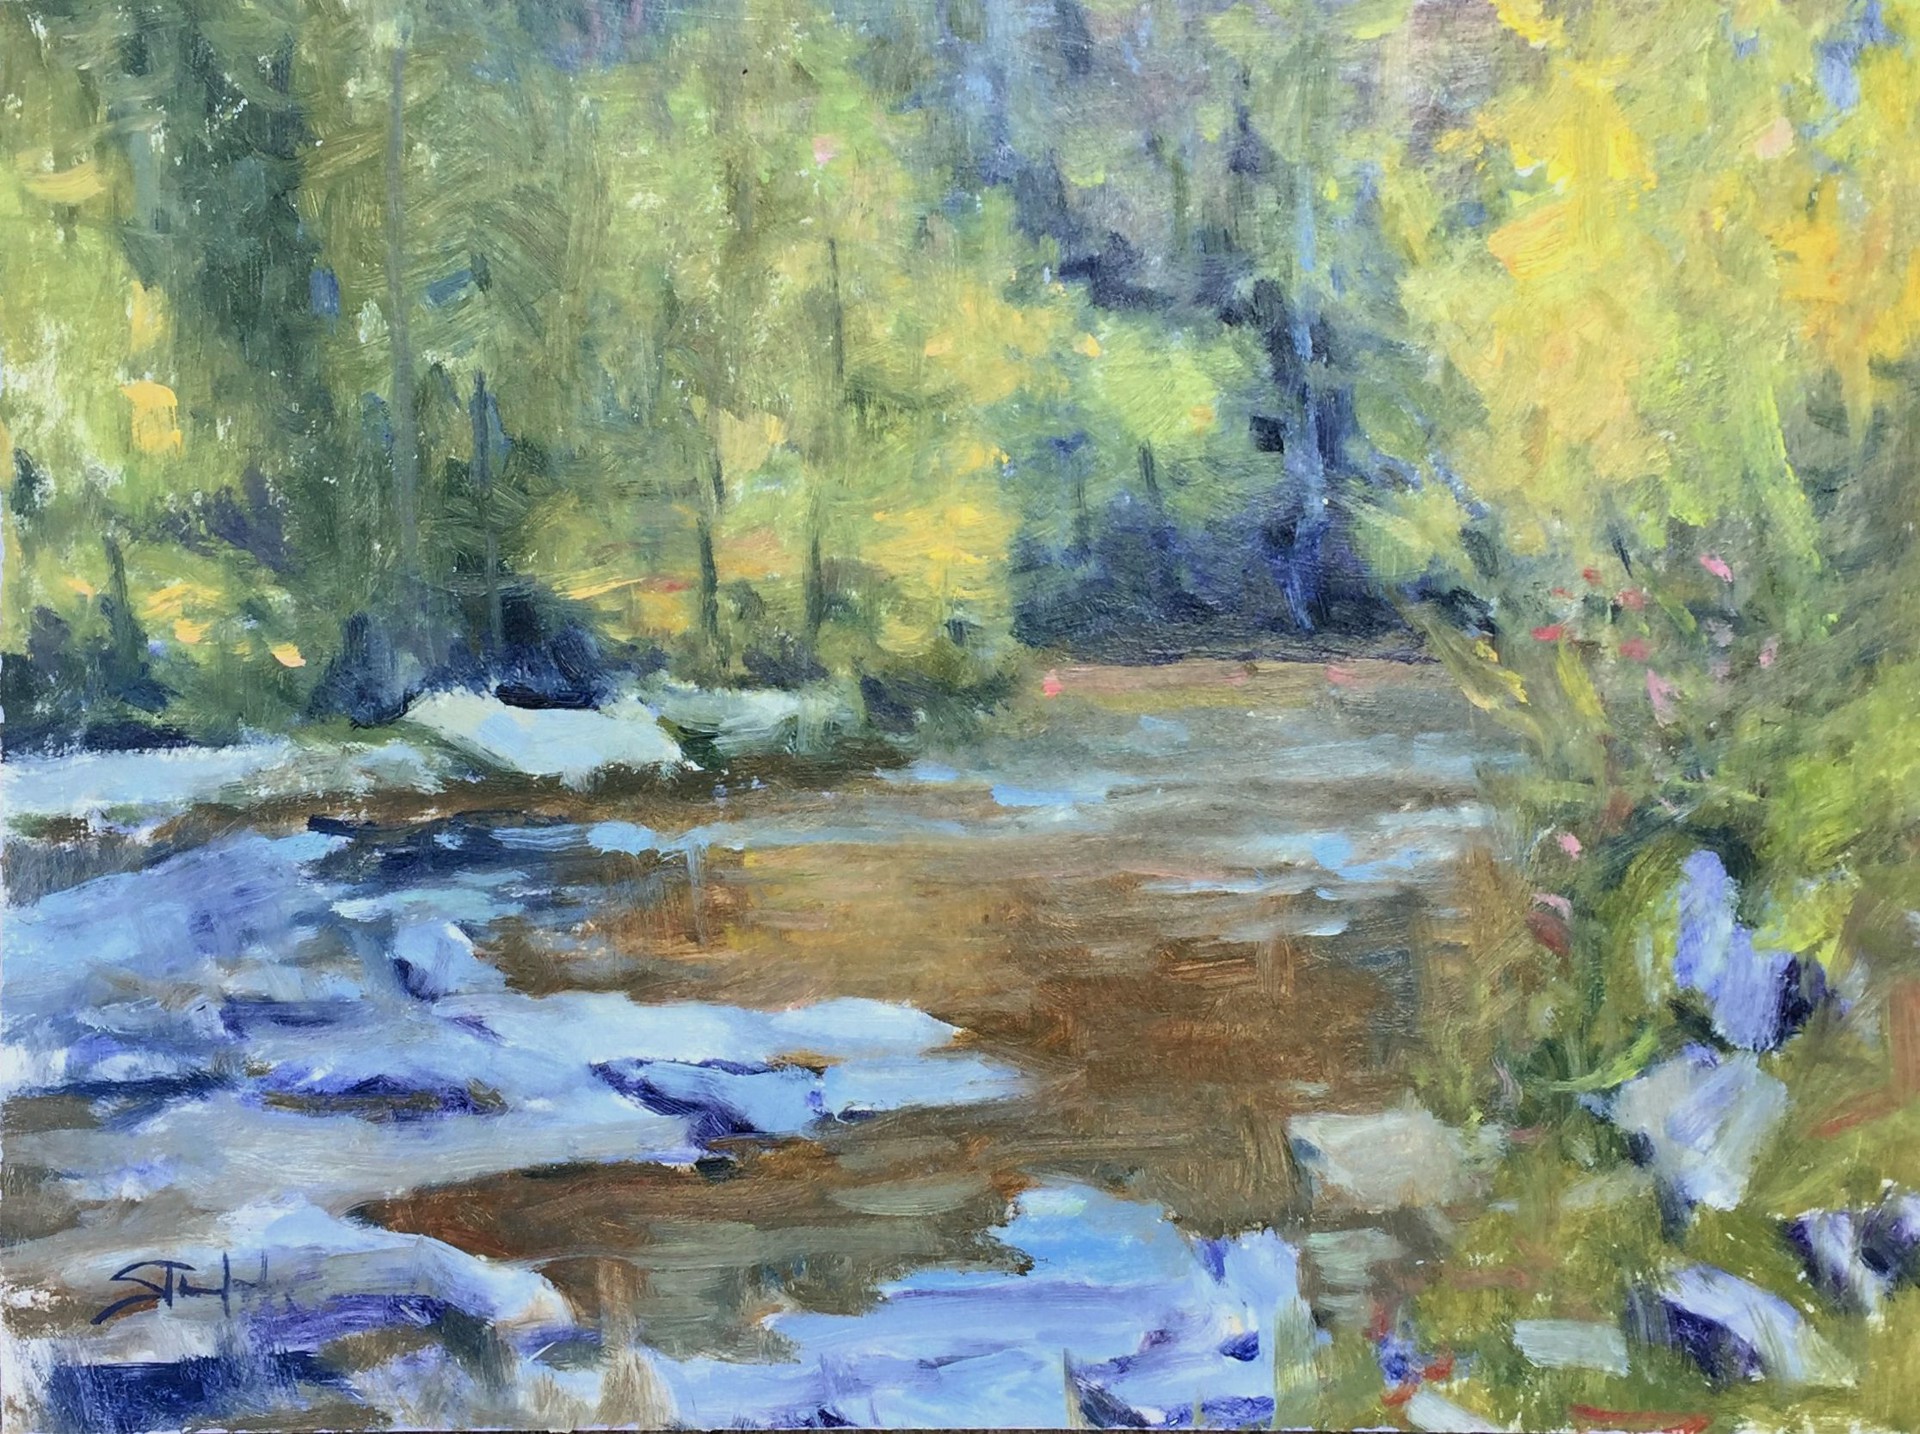 Toccoa River, Fall by John Stanford